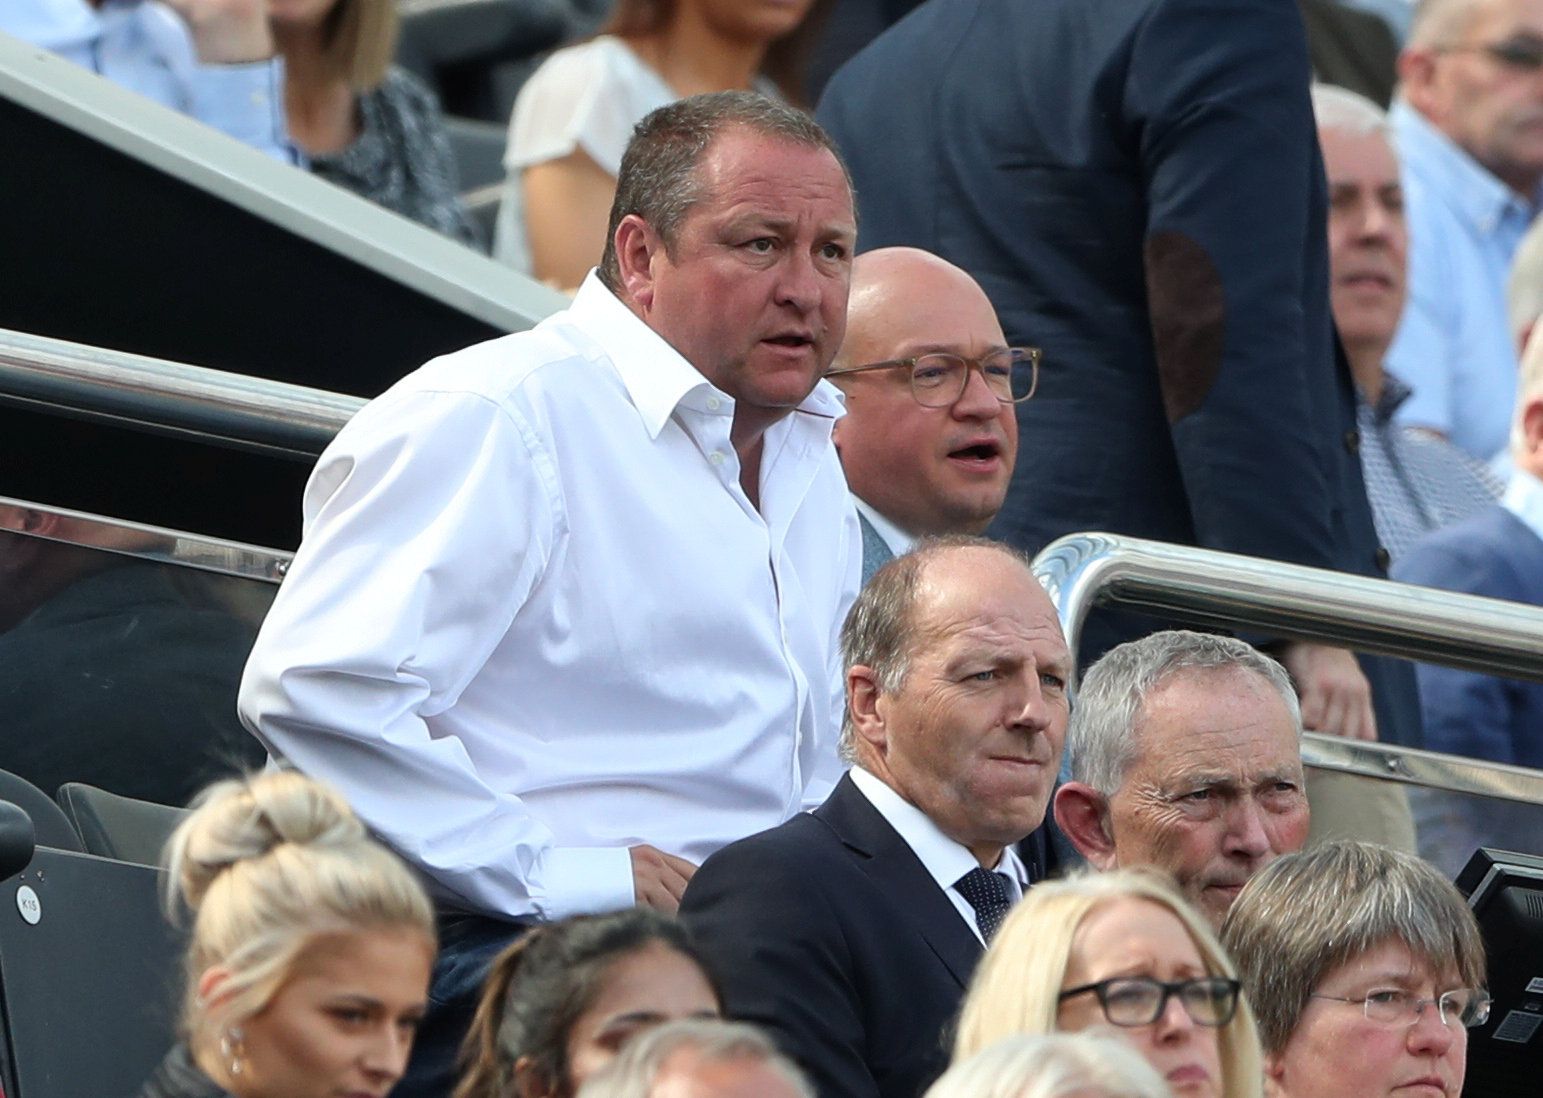 Football Soccer - Premier League - Newcastle United vs Tottenham Hotspur - Newcastle, Britain - August 13, 2017   Newcastle United owner Mike Ashley watches the game from the stands    REUTERS/Scott Heppell  EDITORIAL USE ONLY. No use with unauthorized audio, video, data, fixture lists, club/league logos or 